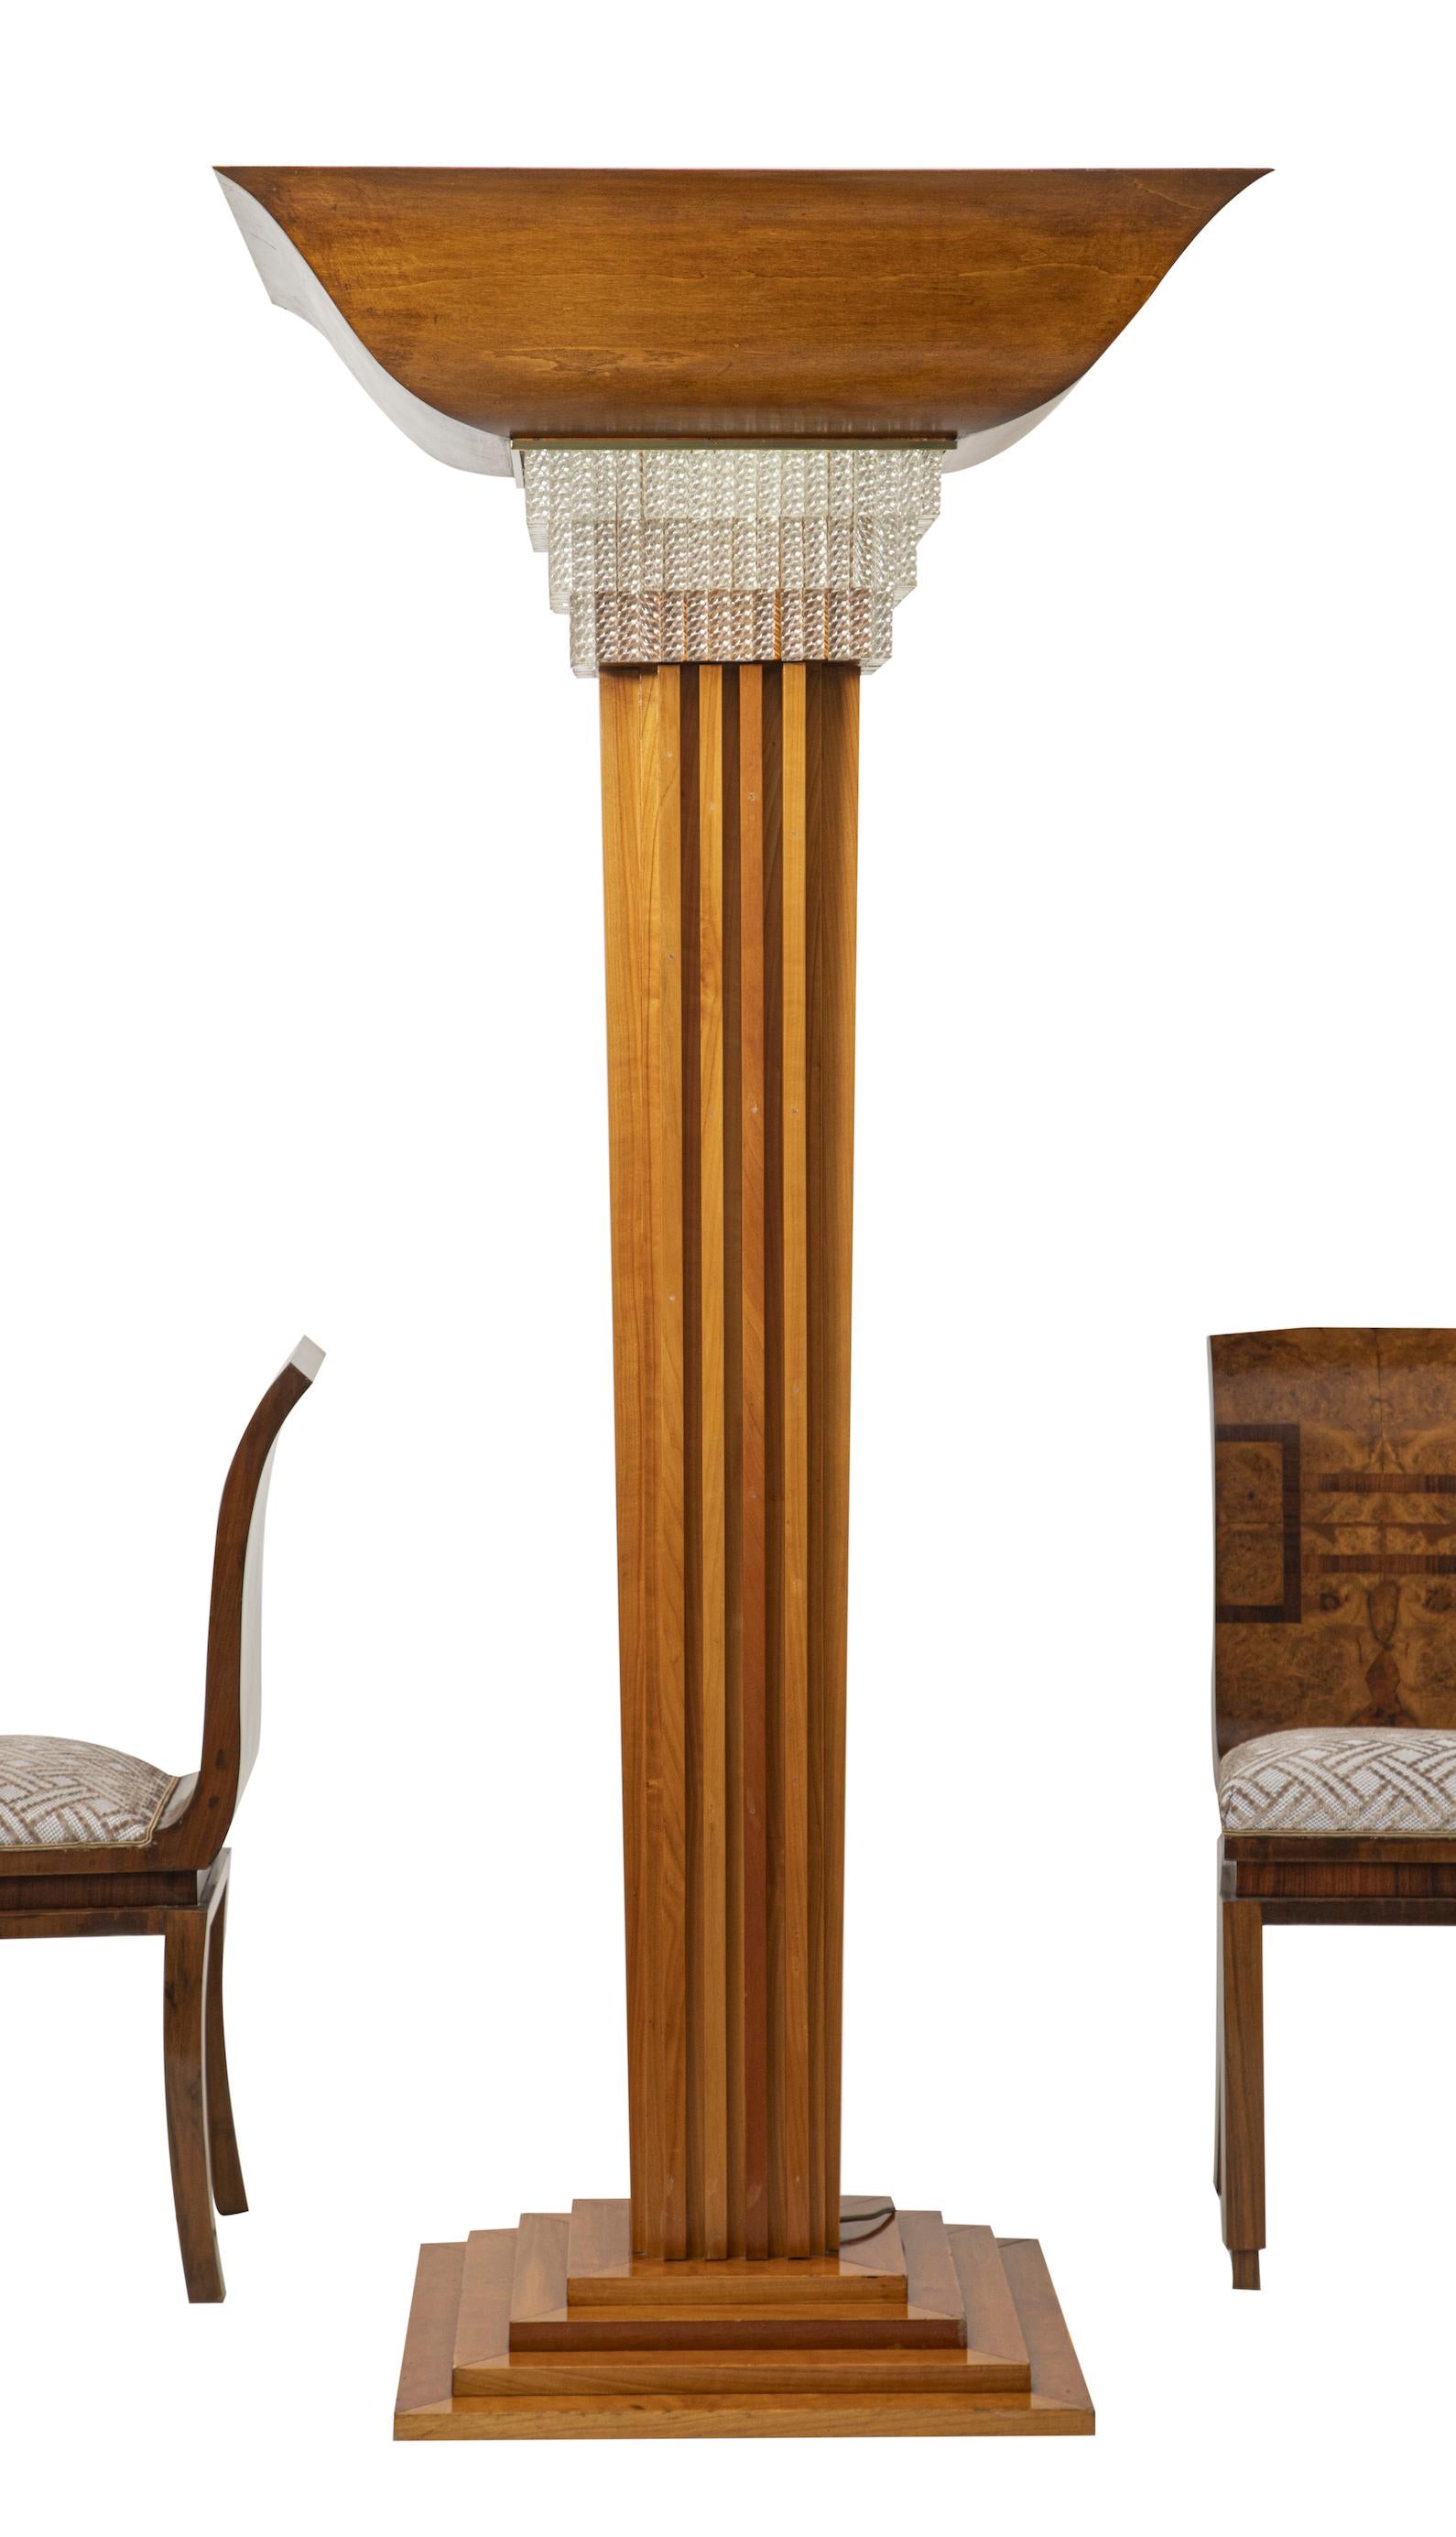 Late 20th Century Pair of  Art Deco Style Floor Lamps Custom-Made in Maple Wood